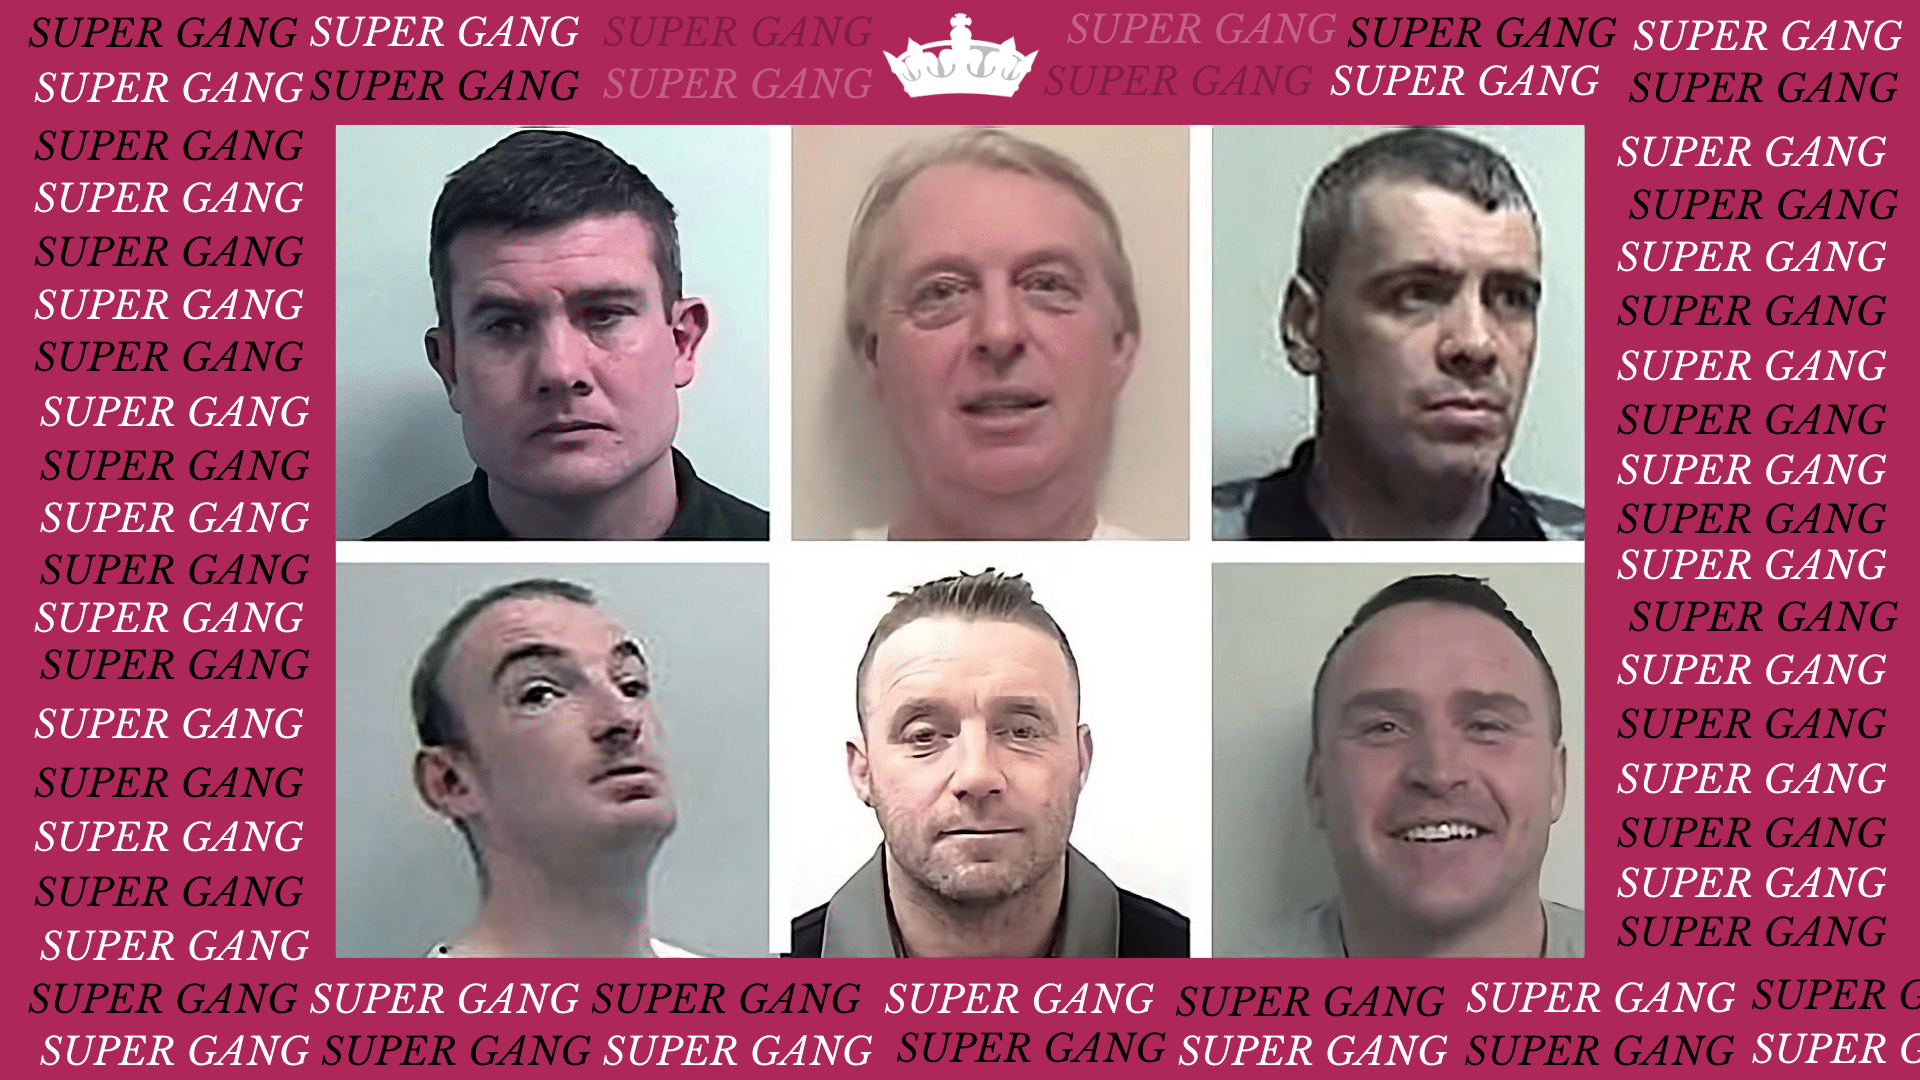 The True Story Of A 200 £2 Million "Super Gang" Who Were Caught After Getting Revenge On A Dealer Who Crossed Them For £30K